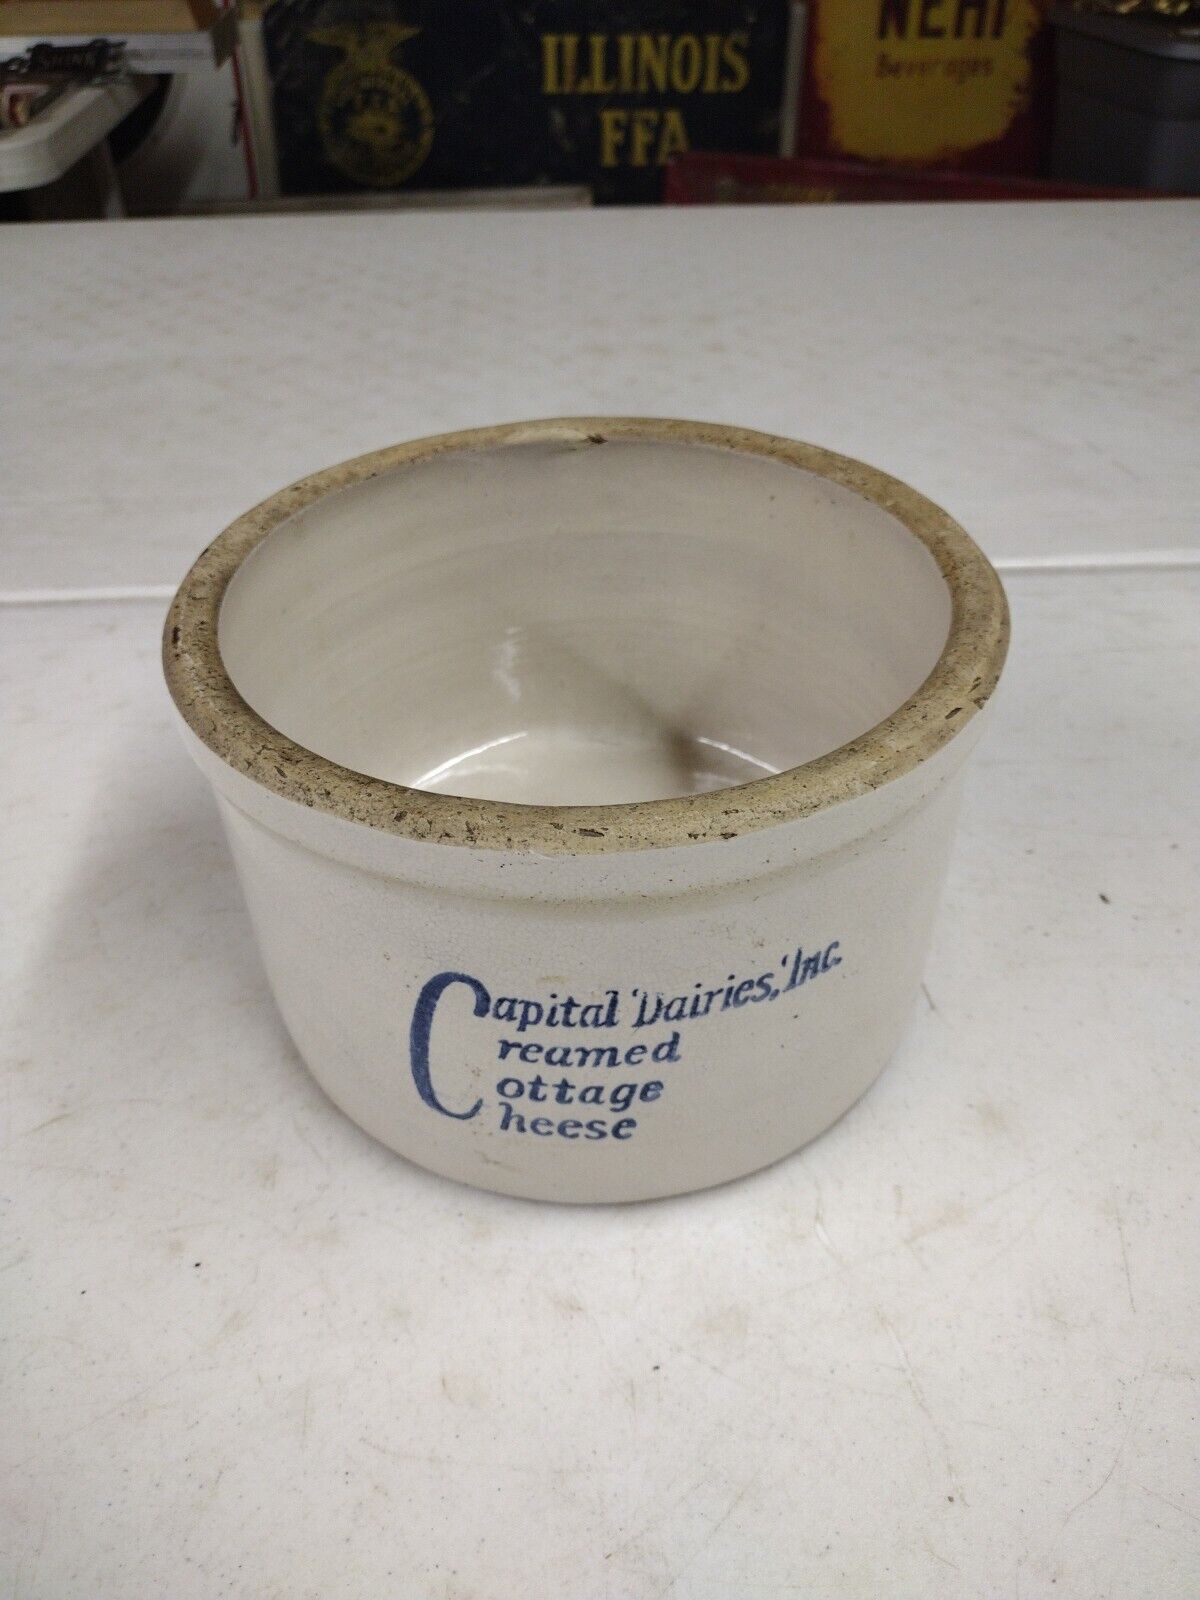 Antique Capital Dairies Inc. Cottage Cheese Advertising Stoneware Crock RARE